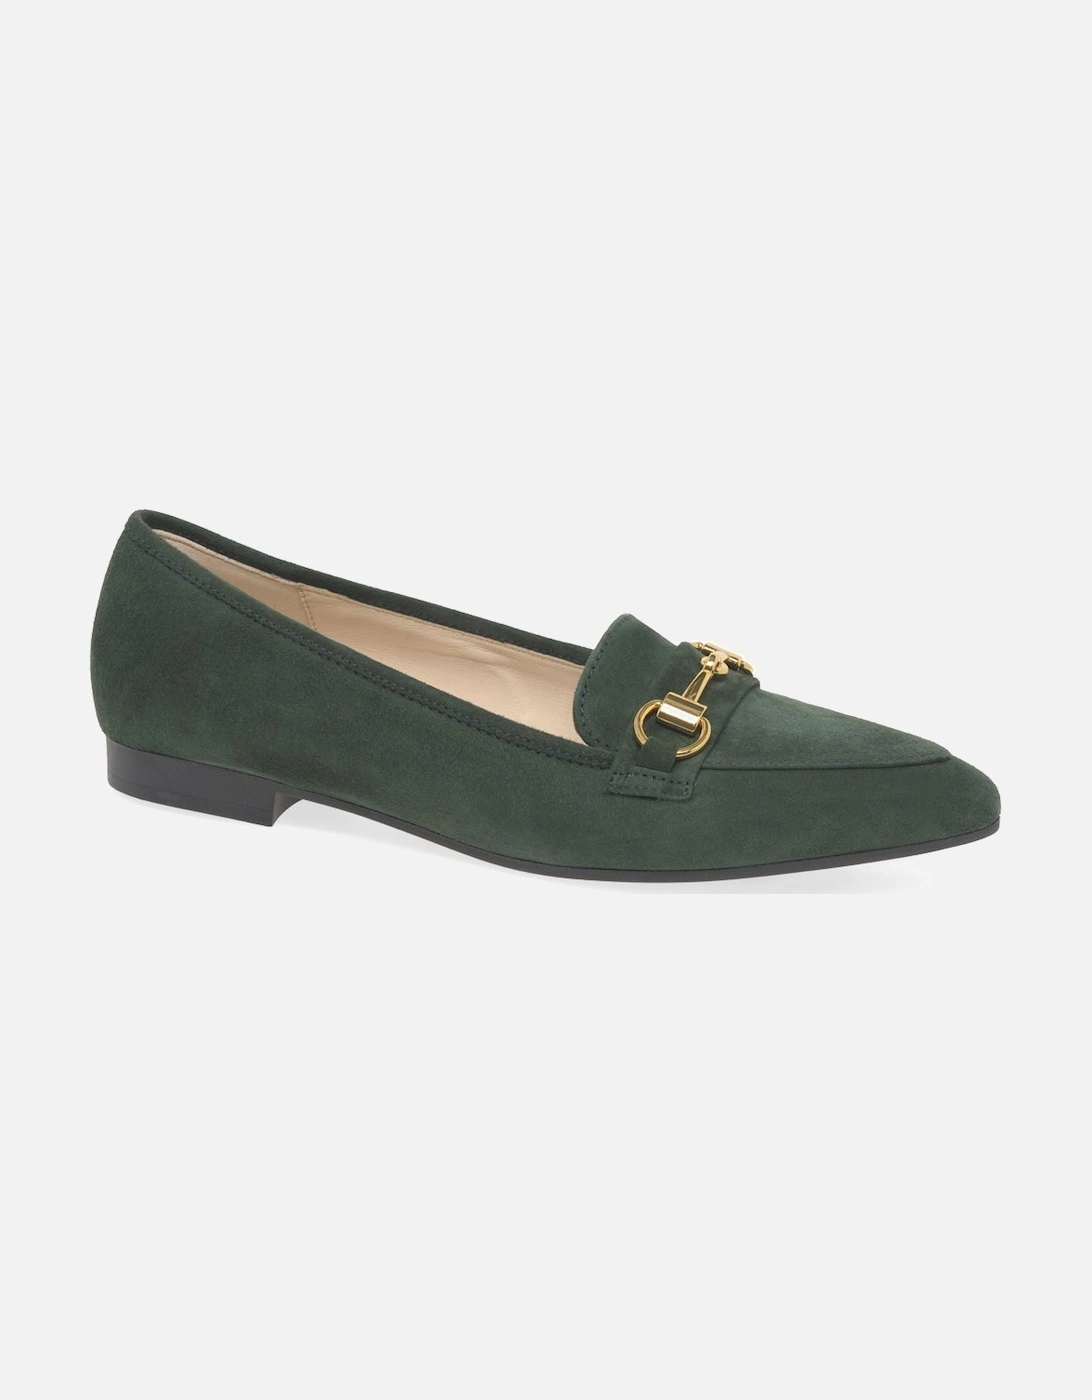 Caterham Womens Shoes, 9 of 8